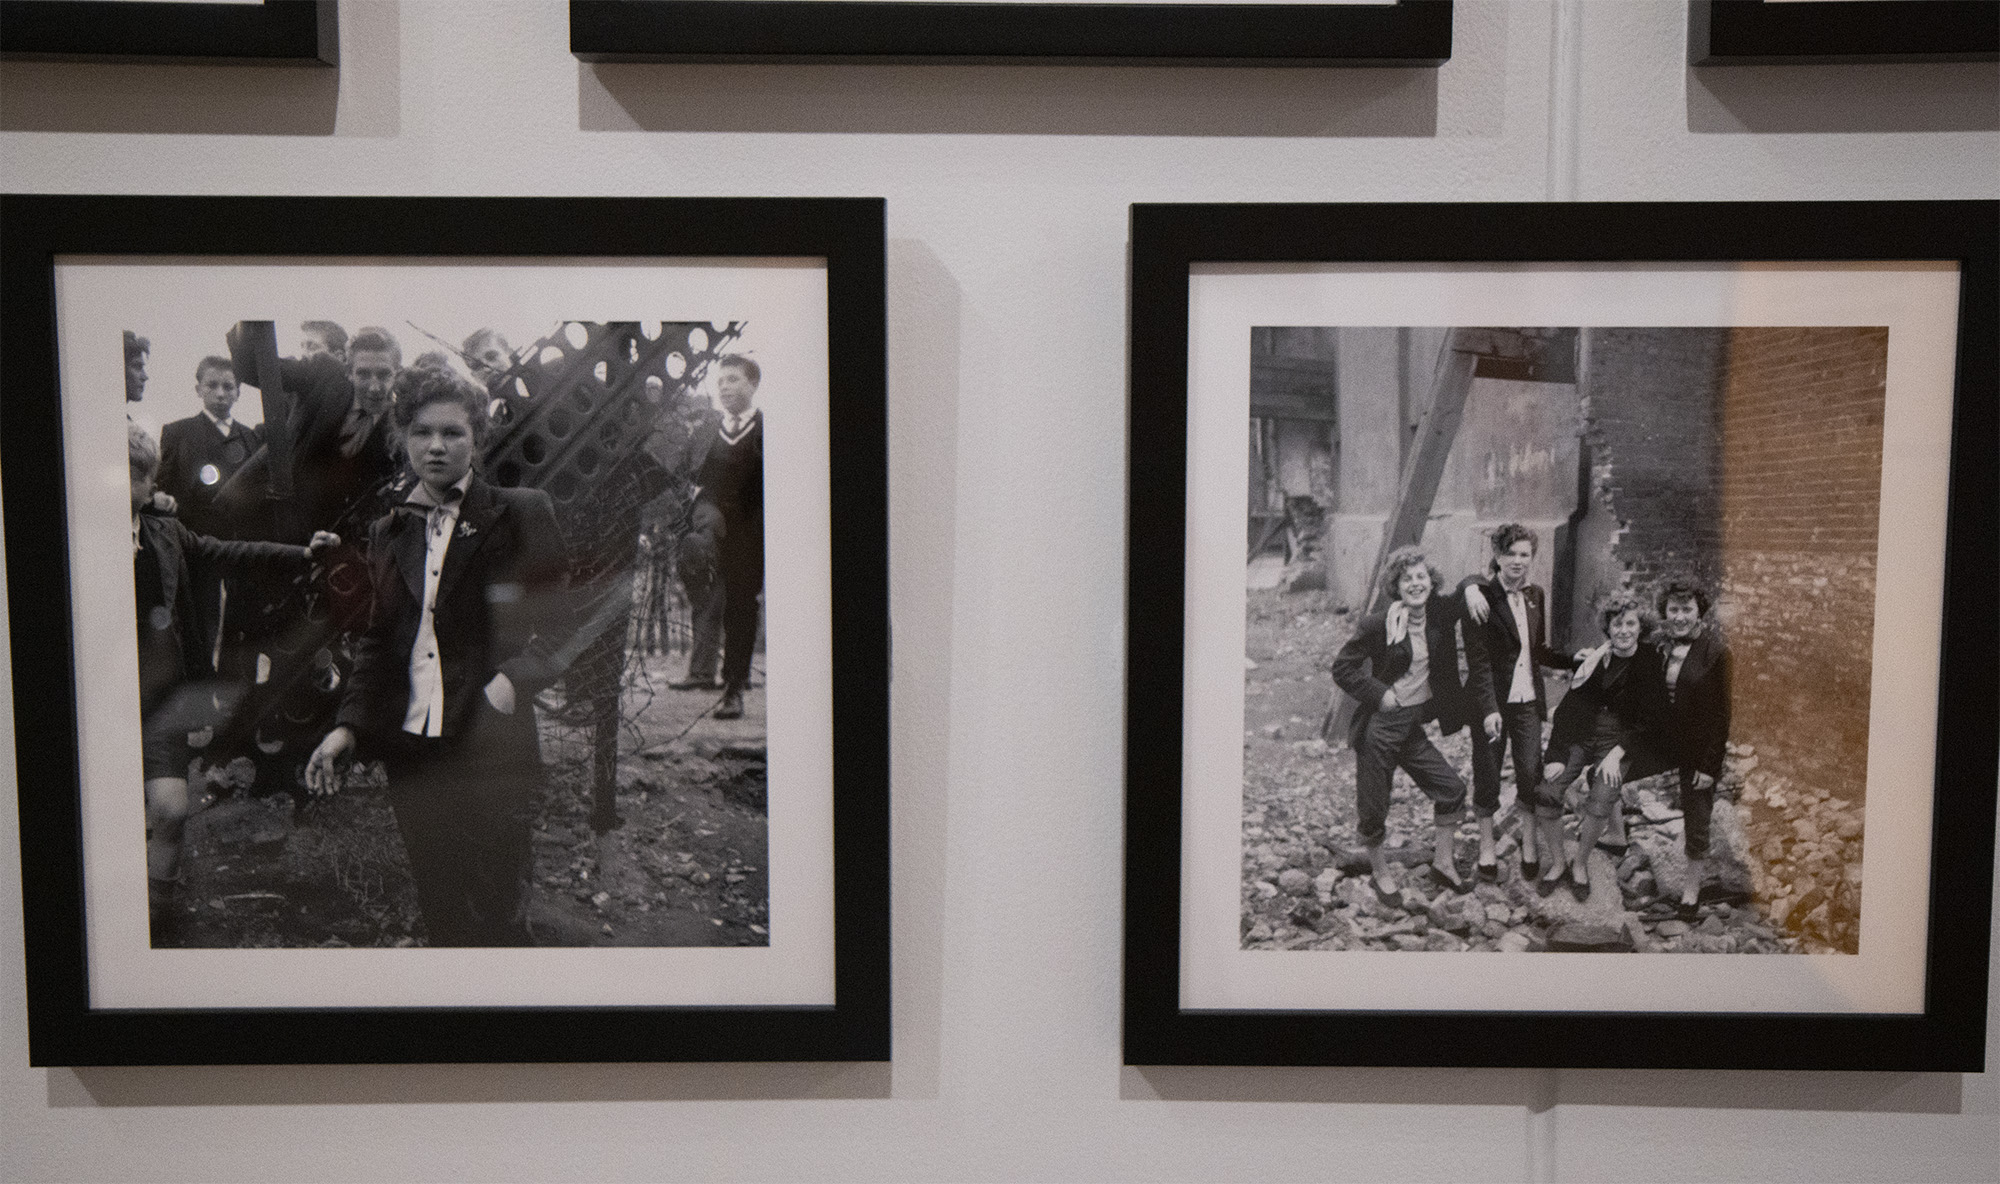 Photographs of Teddy Girls on display in Grown Up in Britain at the Herbert